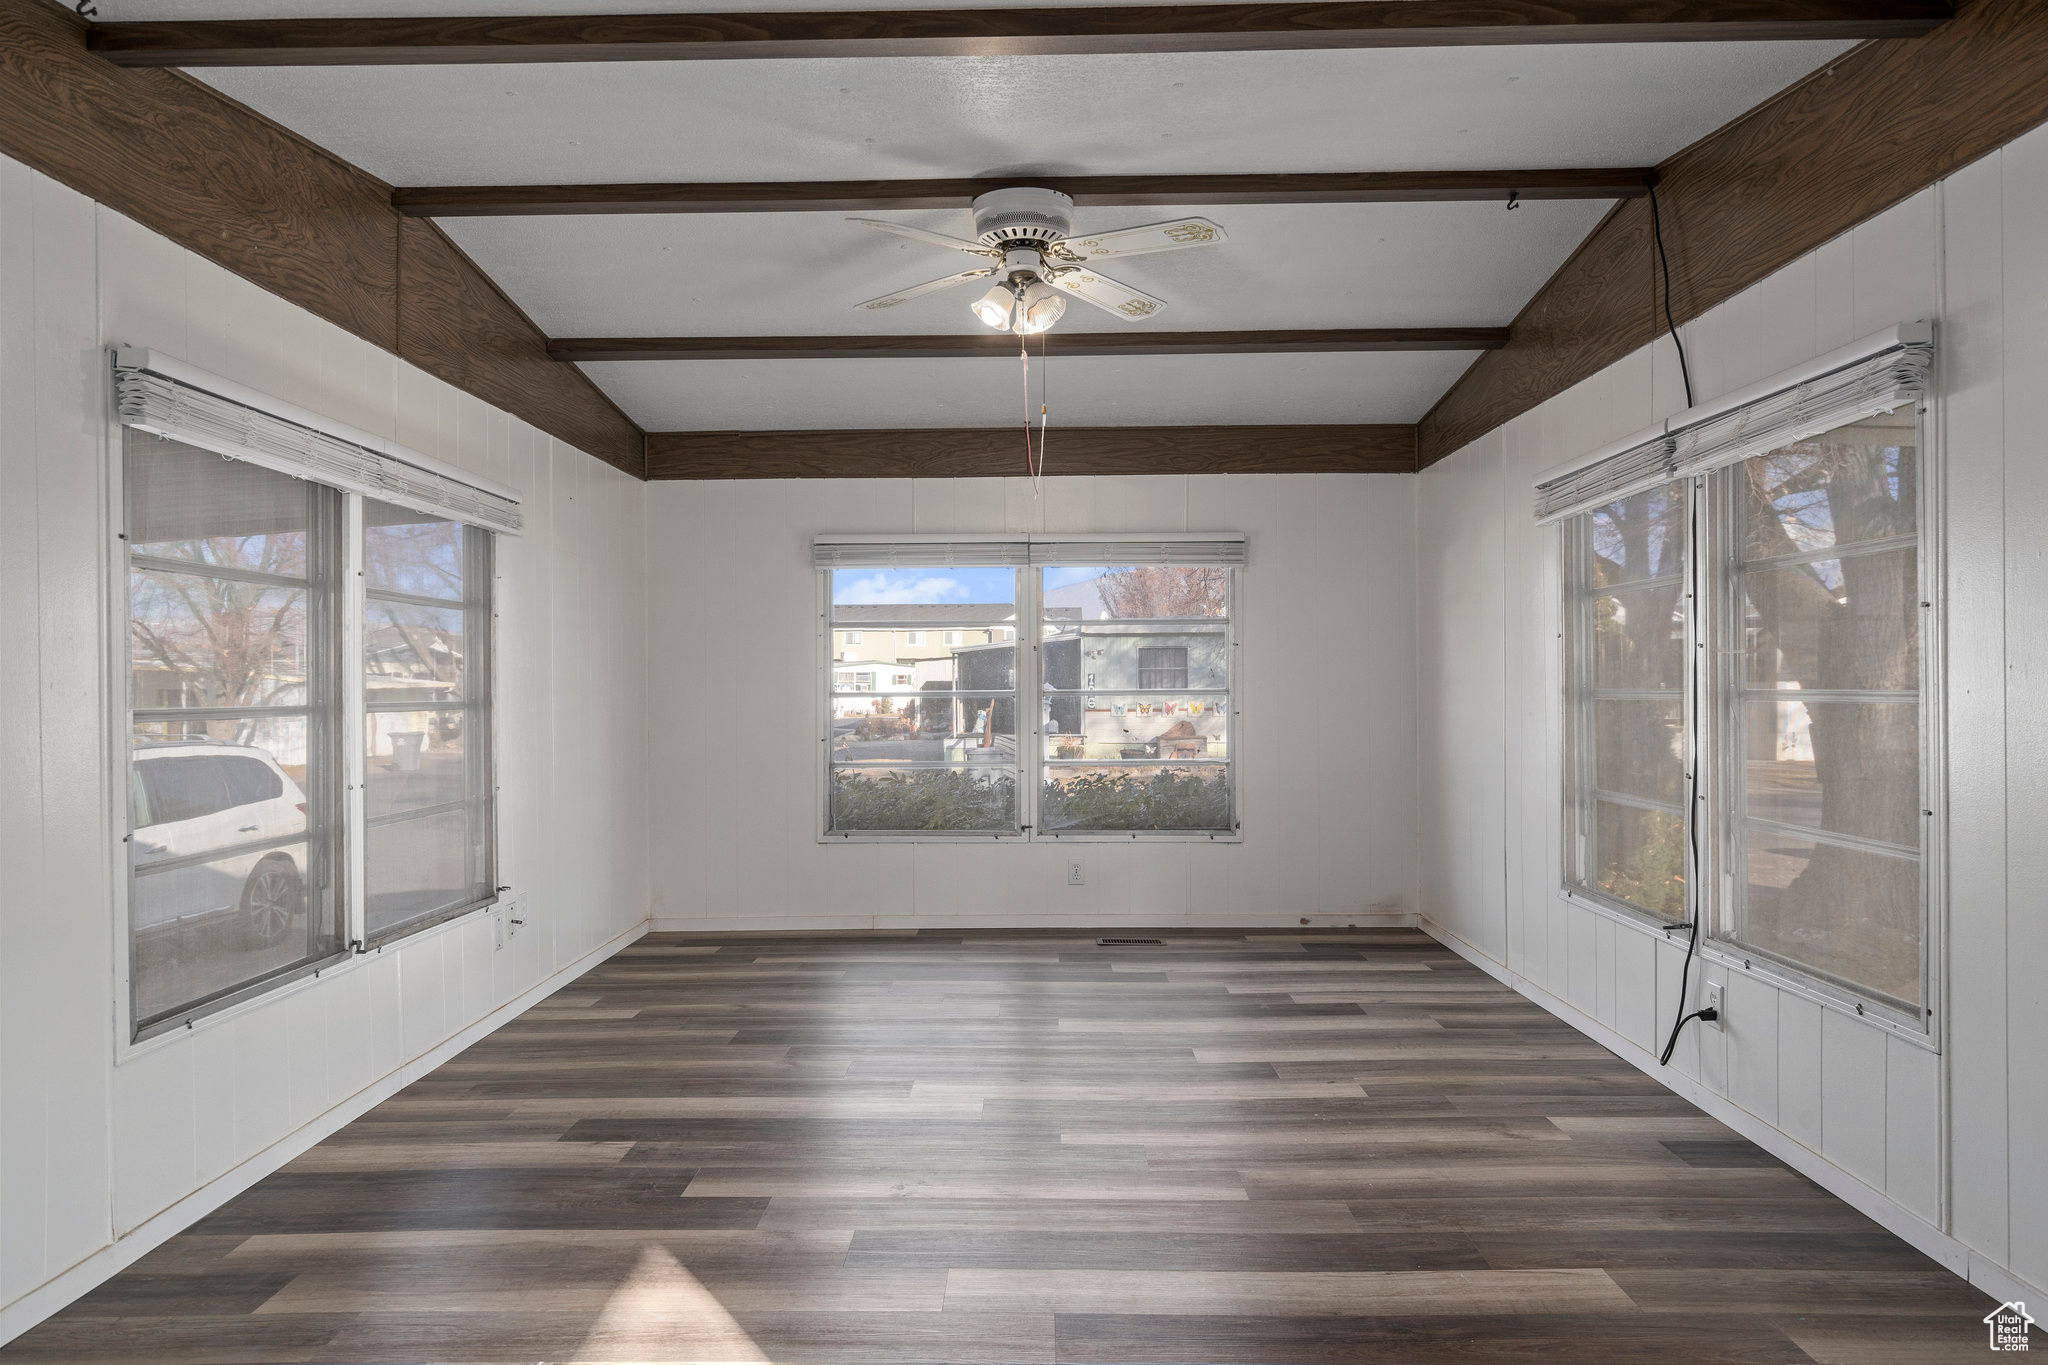 Empty room with lofted ceiling with beams, dark hardwood / wood-style floors, and ceiling fan